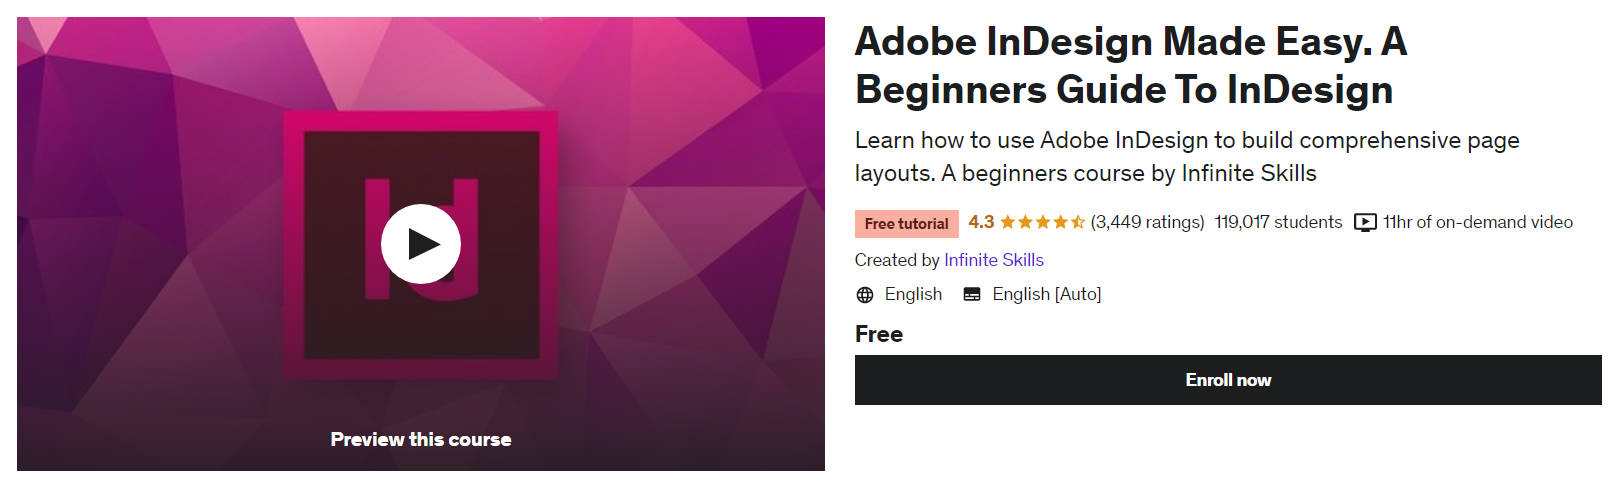 Adobe InDesign made Easy – A Beginners Guide to InDesign